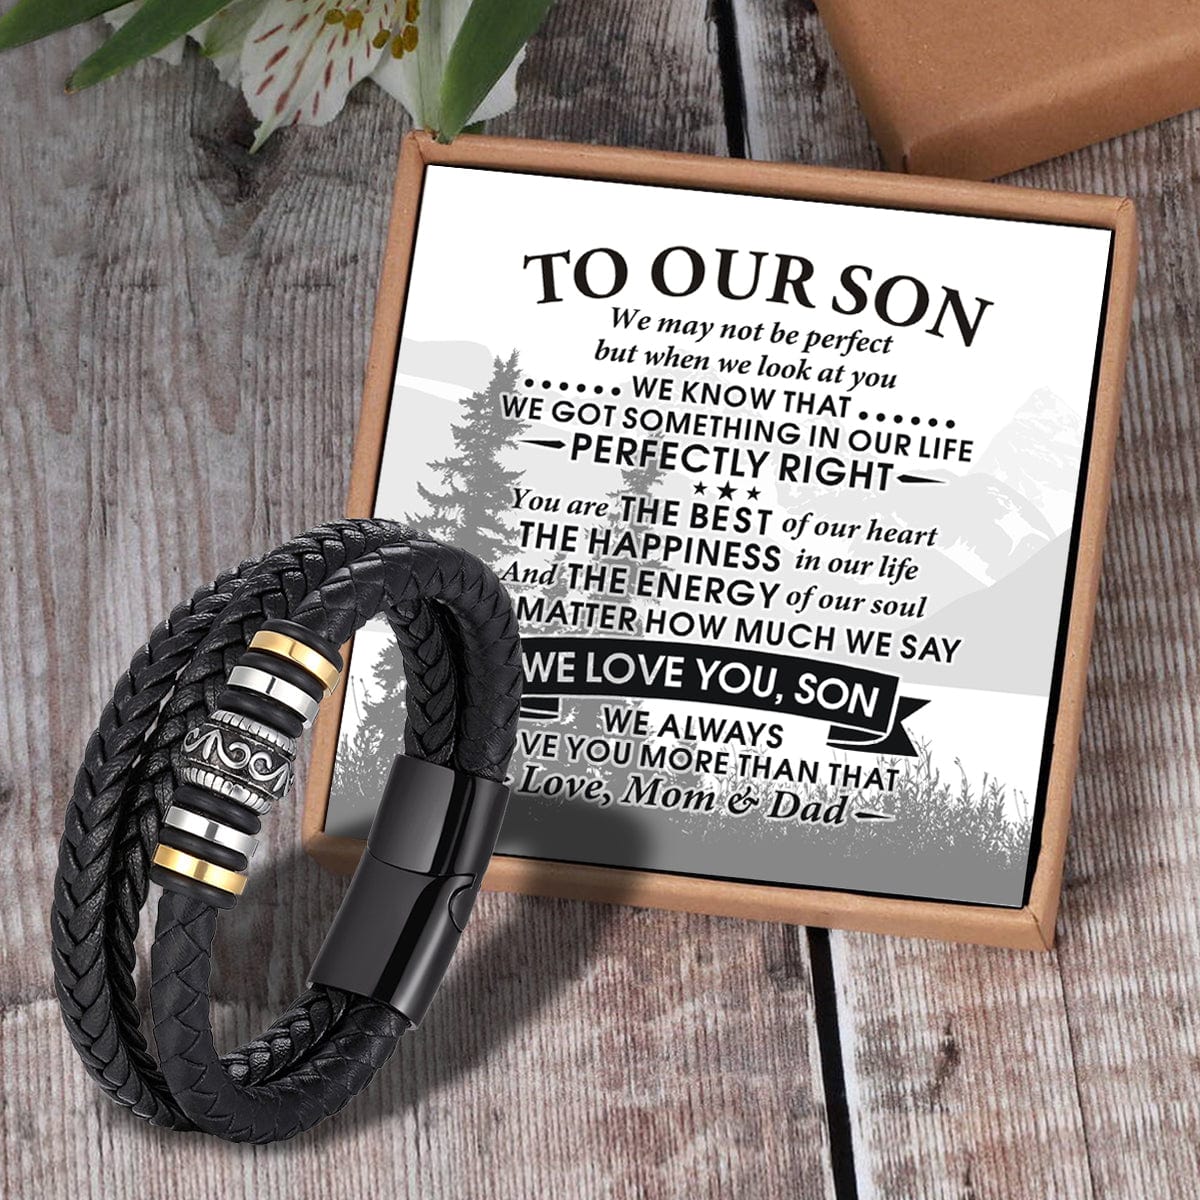 Bracelets For Son To Our Son - We Love You Braided Leather Bracelet Black GiveMe-Gifts